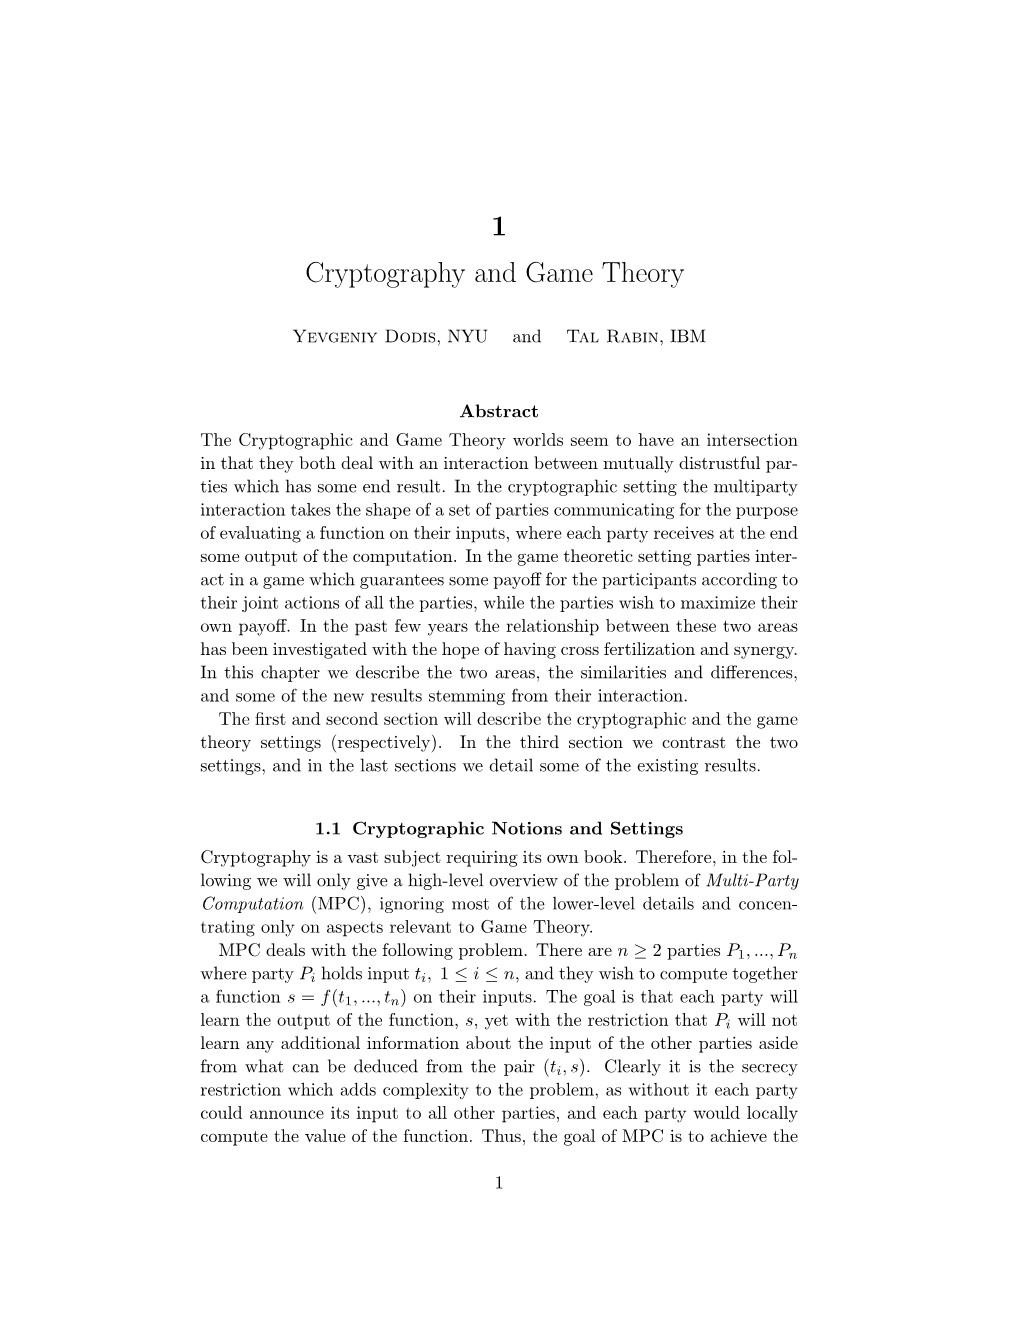 1 Cryptography and Game Theory